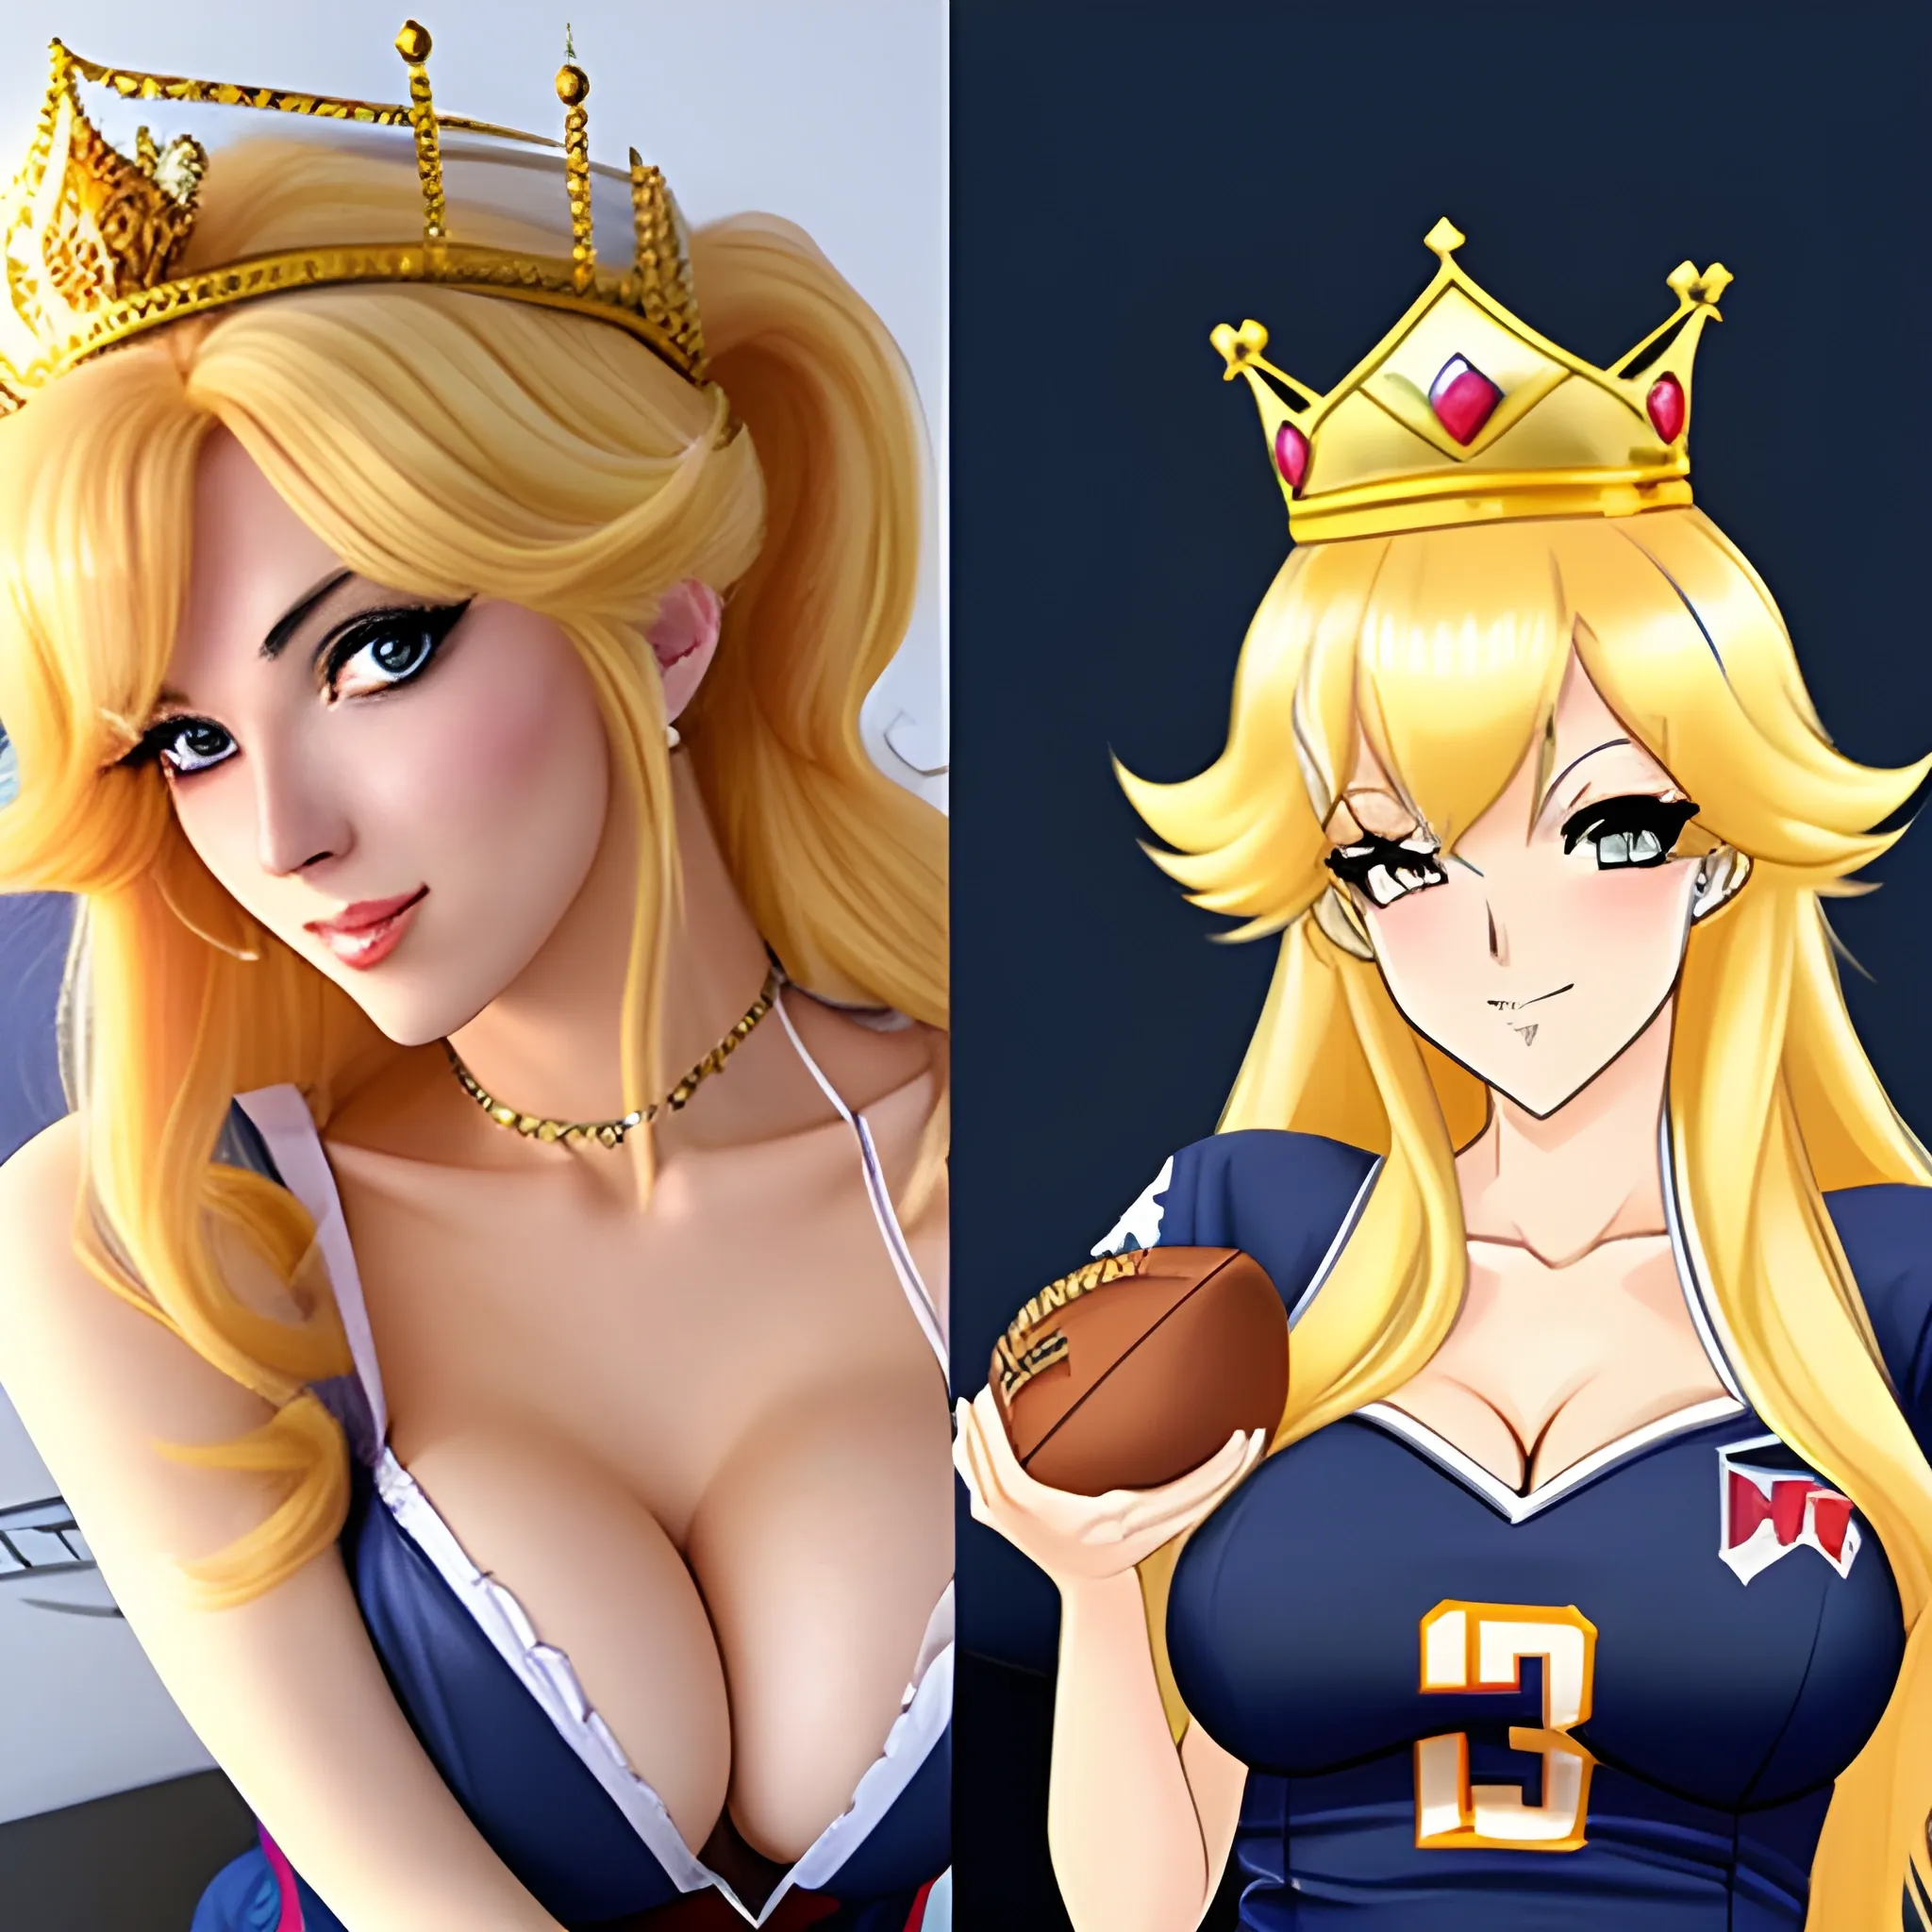 Attractive, cute, sexy anime style Princess peach blonde girl with a crown and an american football in a navy blue busch light beer jersey. The image should be sexy and have a Playboy feel to it